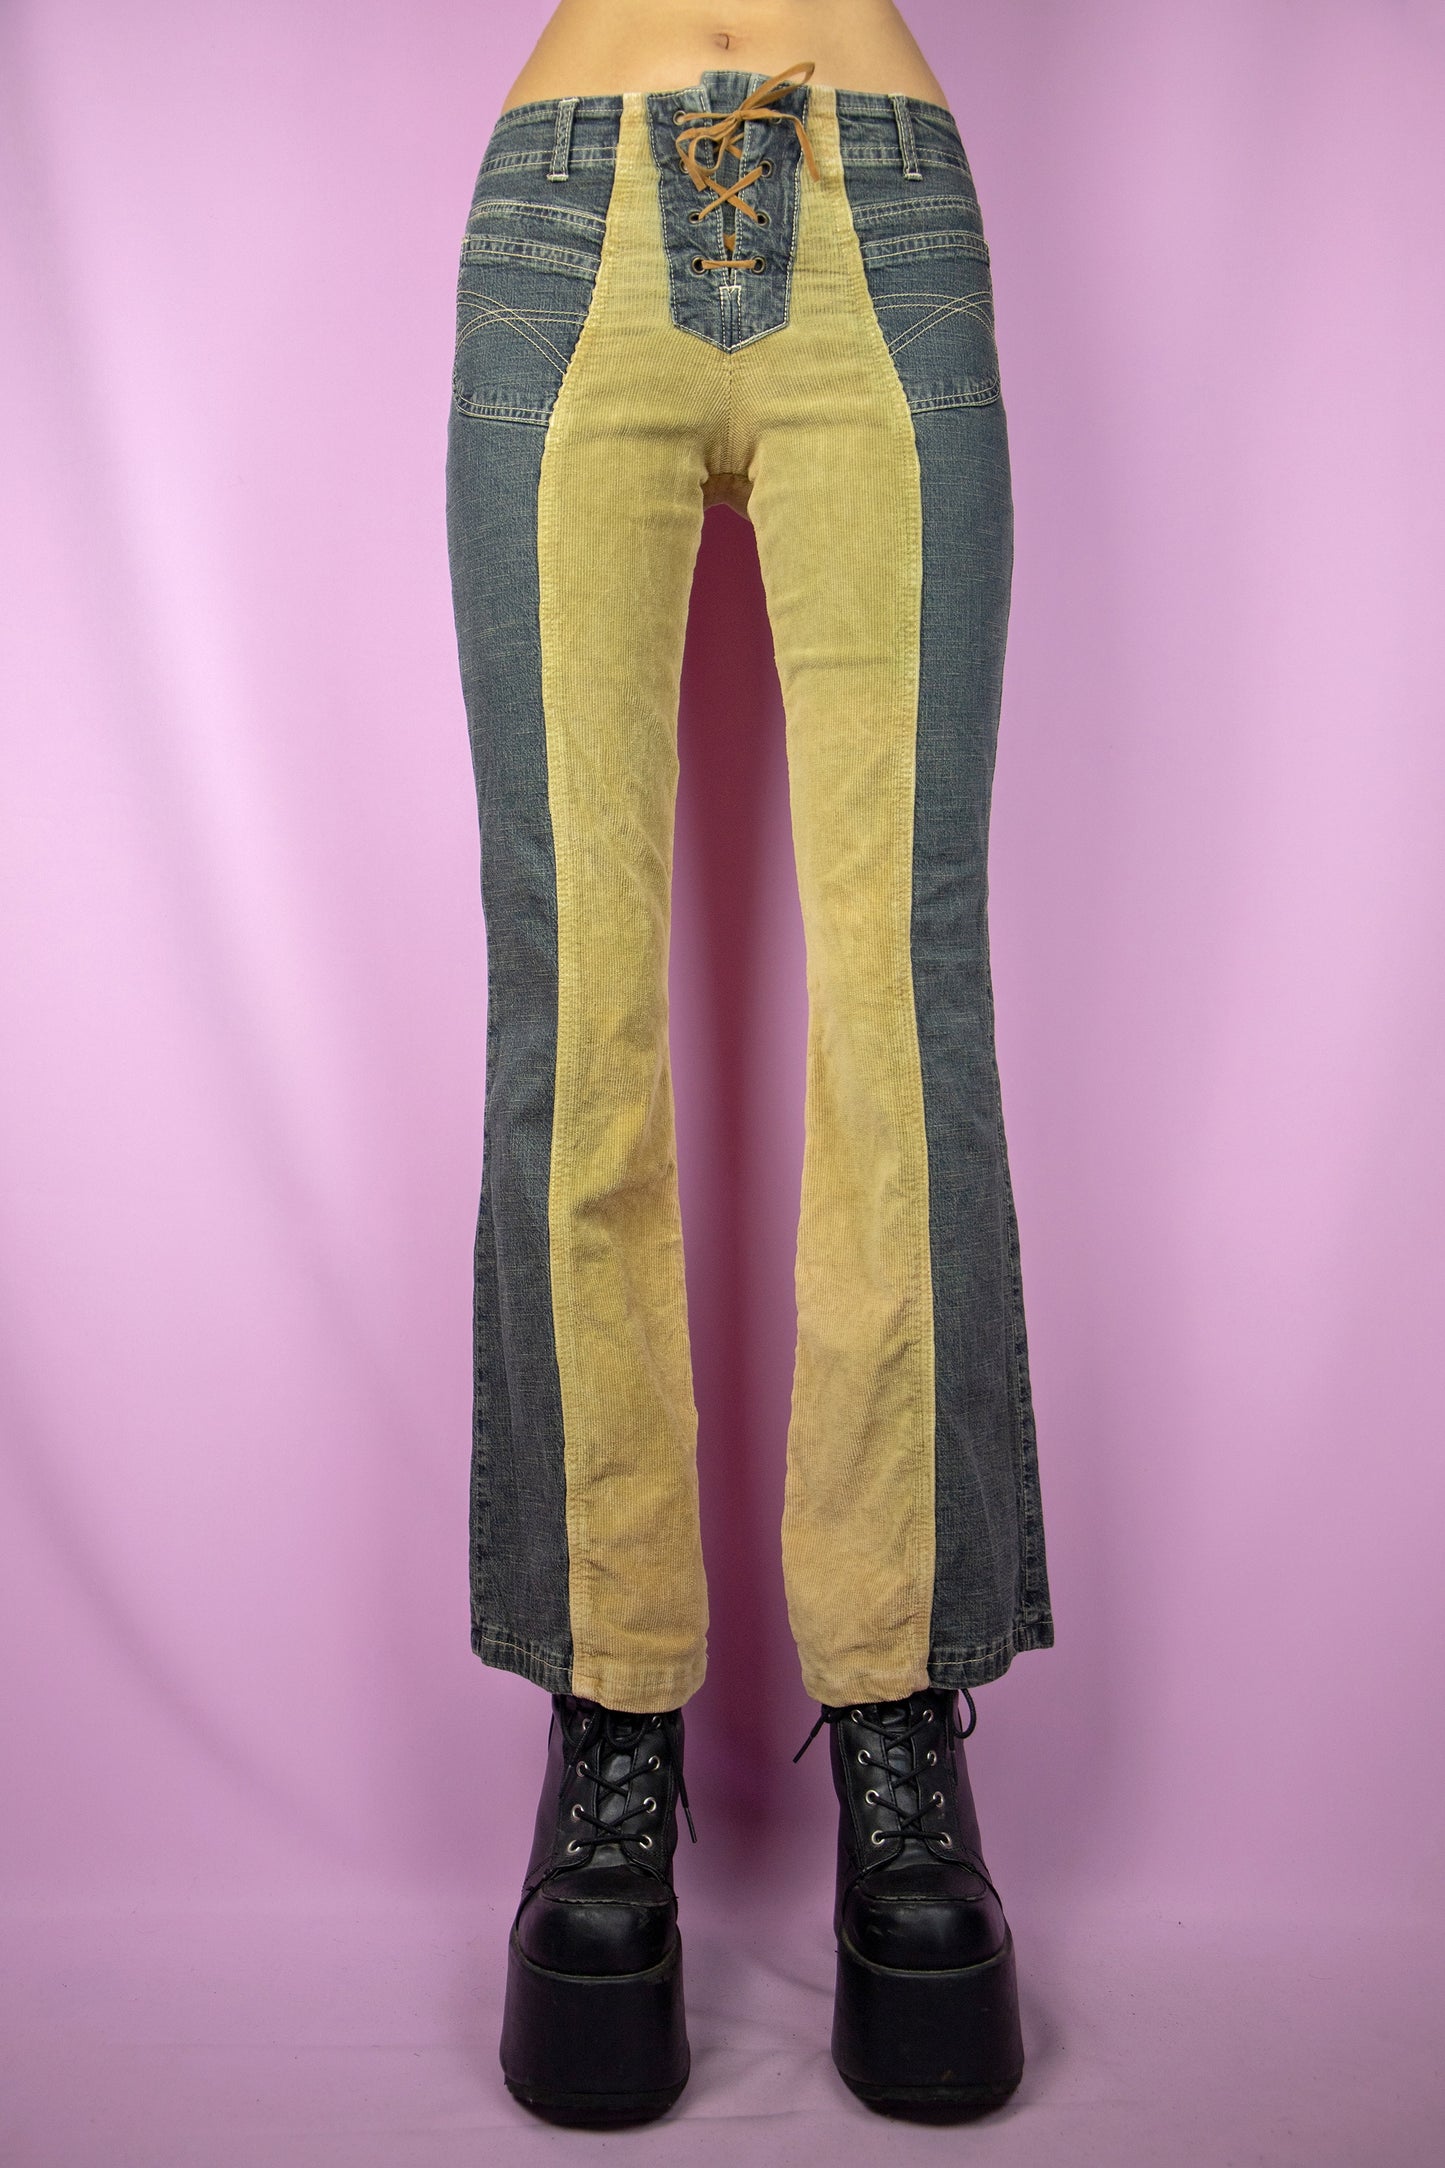 The Vintage Y2K Lace-Up Flare Jeans are mid-rise, featuring a unique design with half-denim and half-beige corduroy. These stretchy flared pants come with pockets and a tie-front detail, representing the iconic cyber millennium denim style from the 2000s.